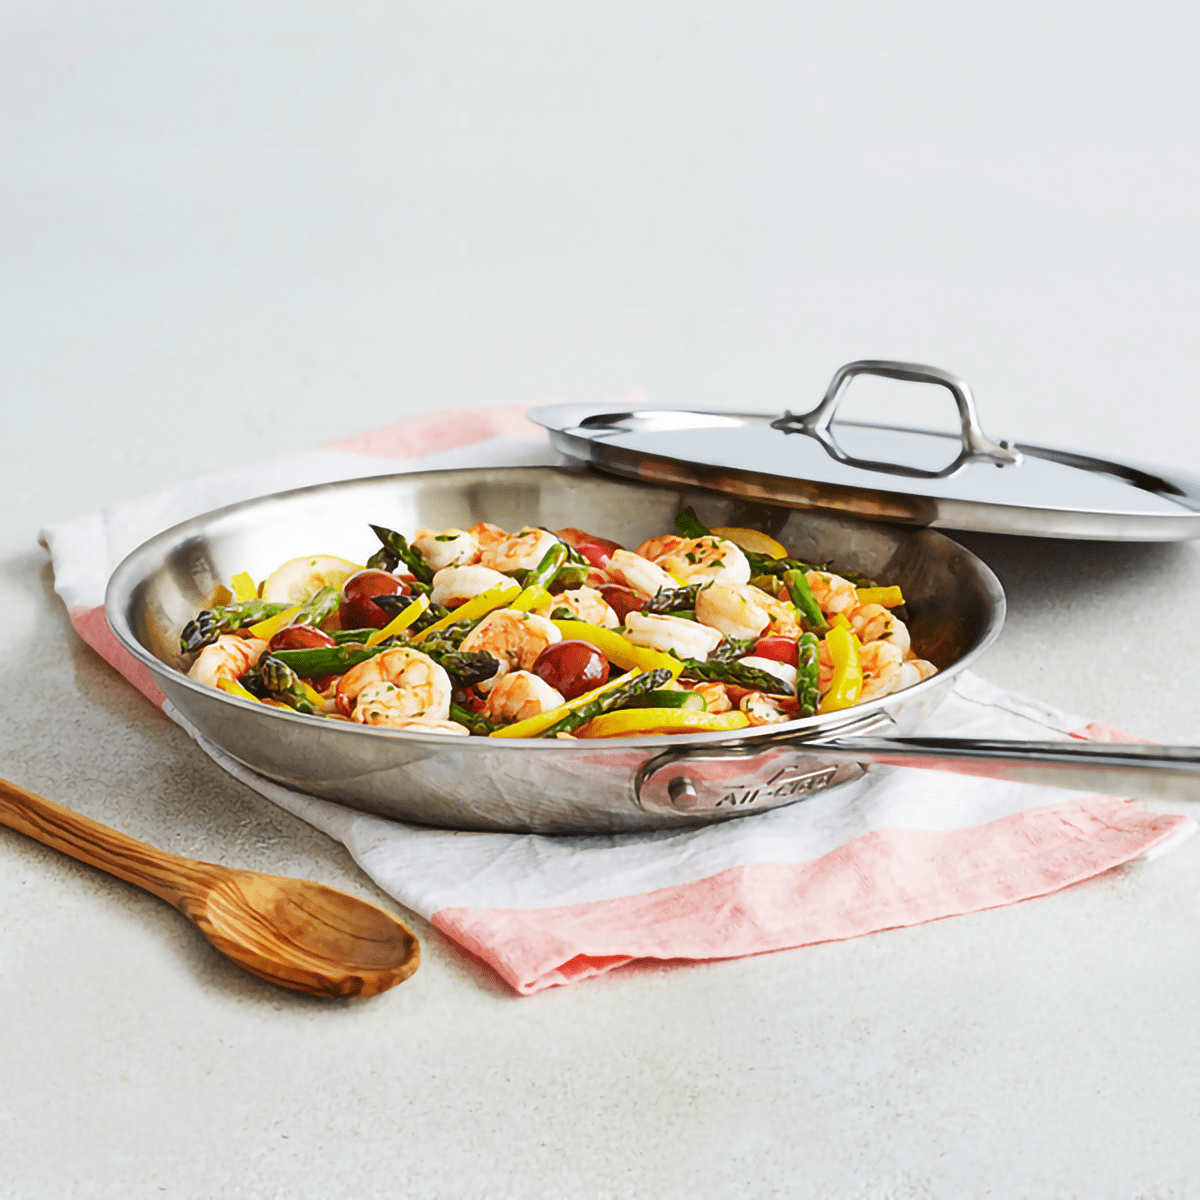 https://www.tasteofhome.com/wp-content/uploads/2022/01/all-clad-stainless-steel-skillet-via-surlatable.com-ecomm.png?fit=680%2C680